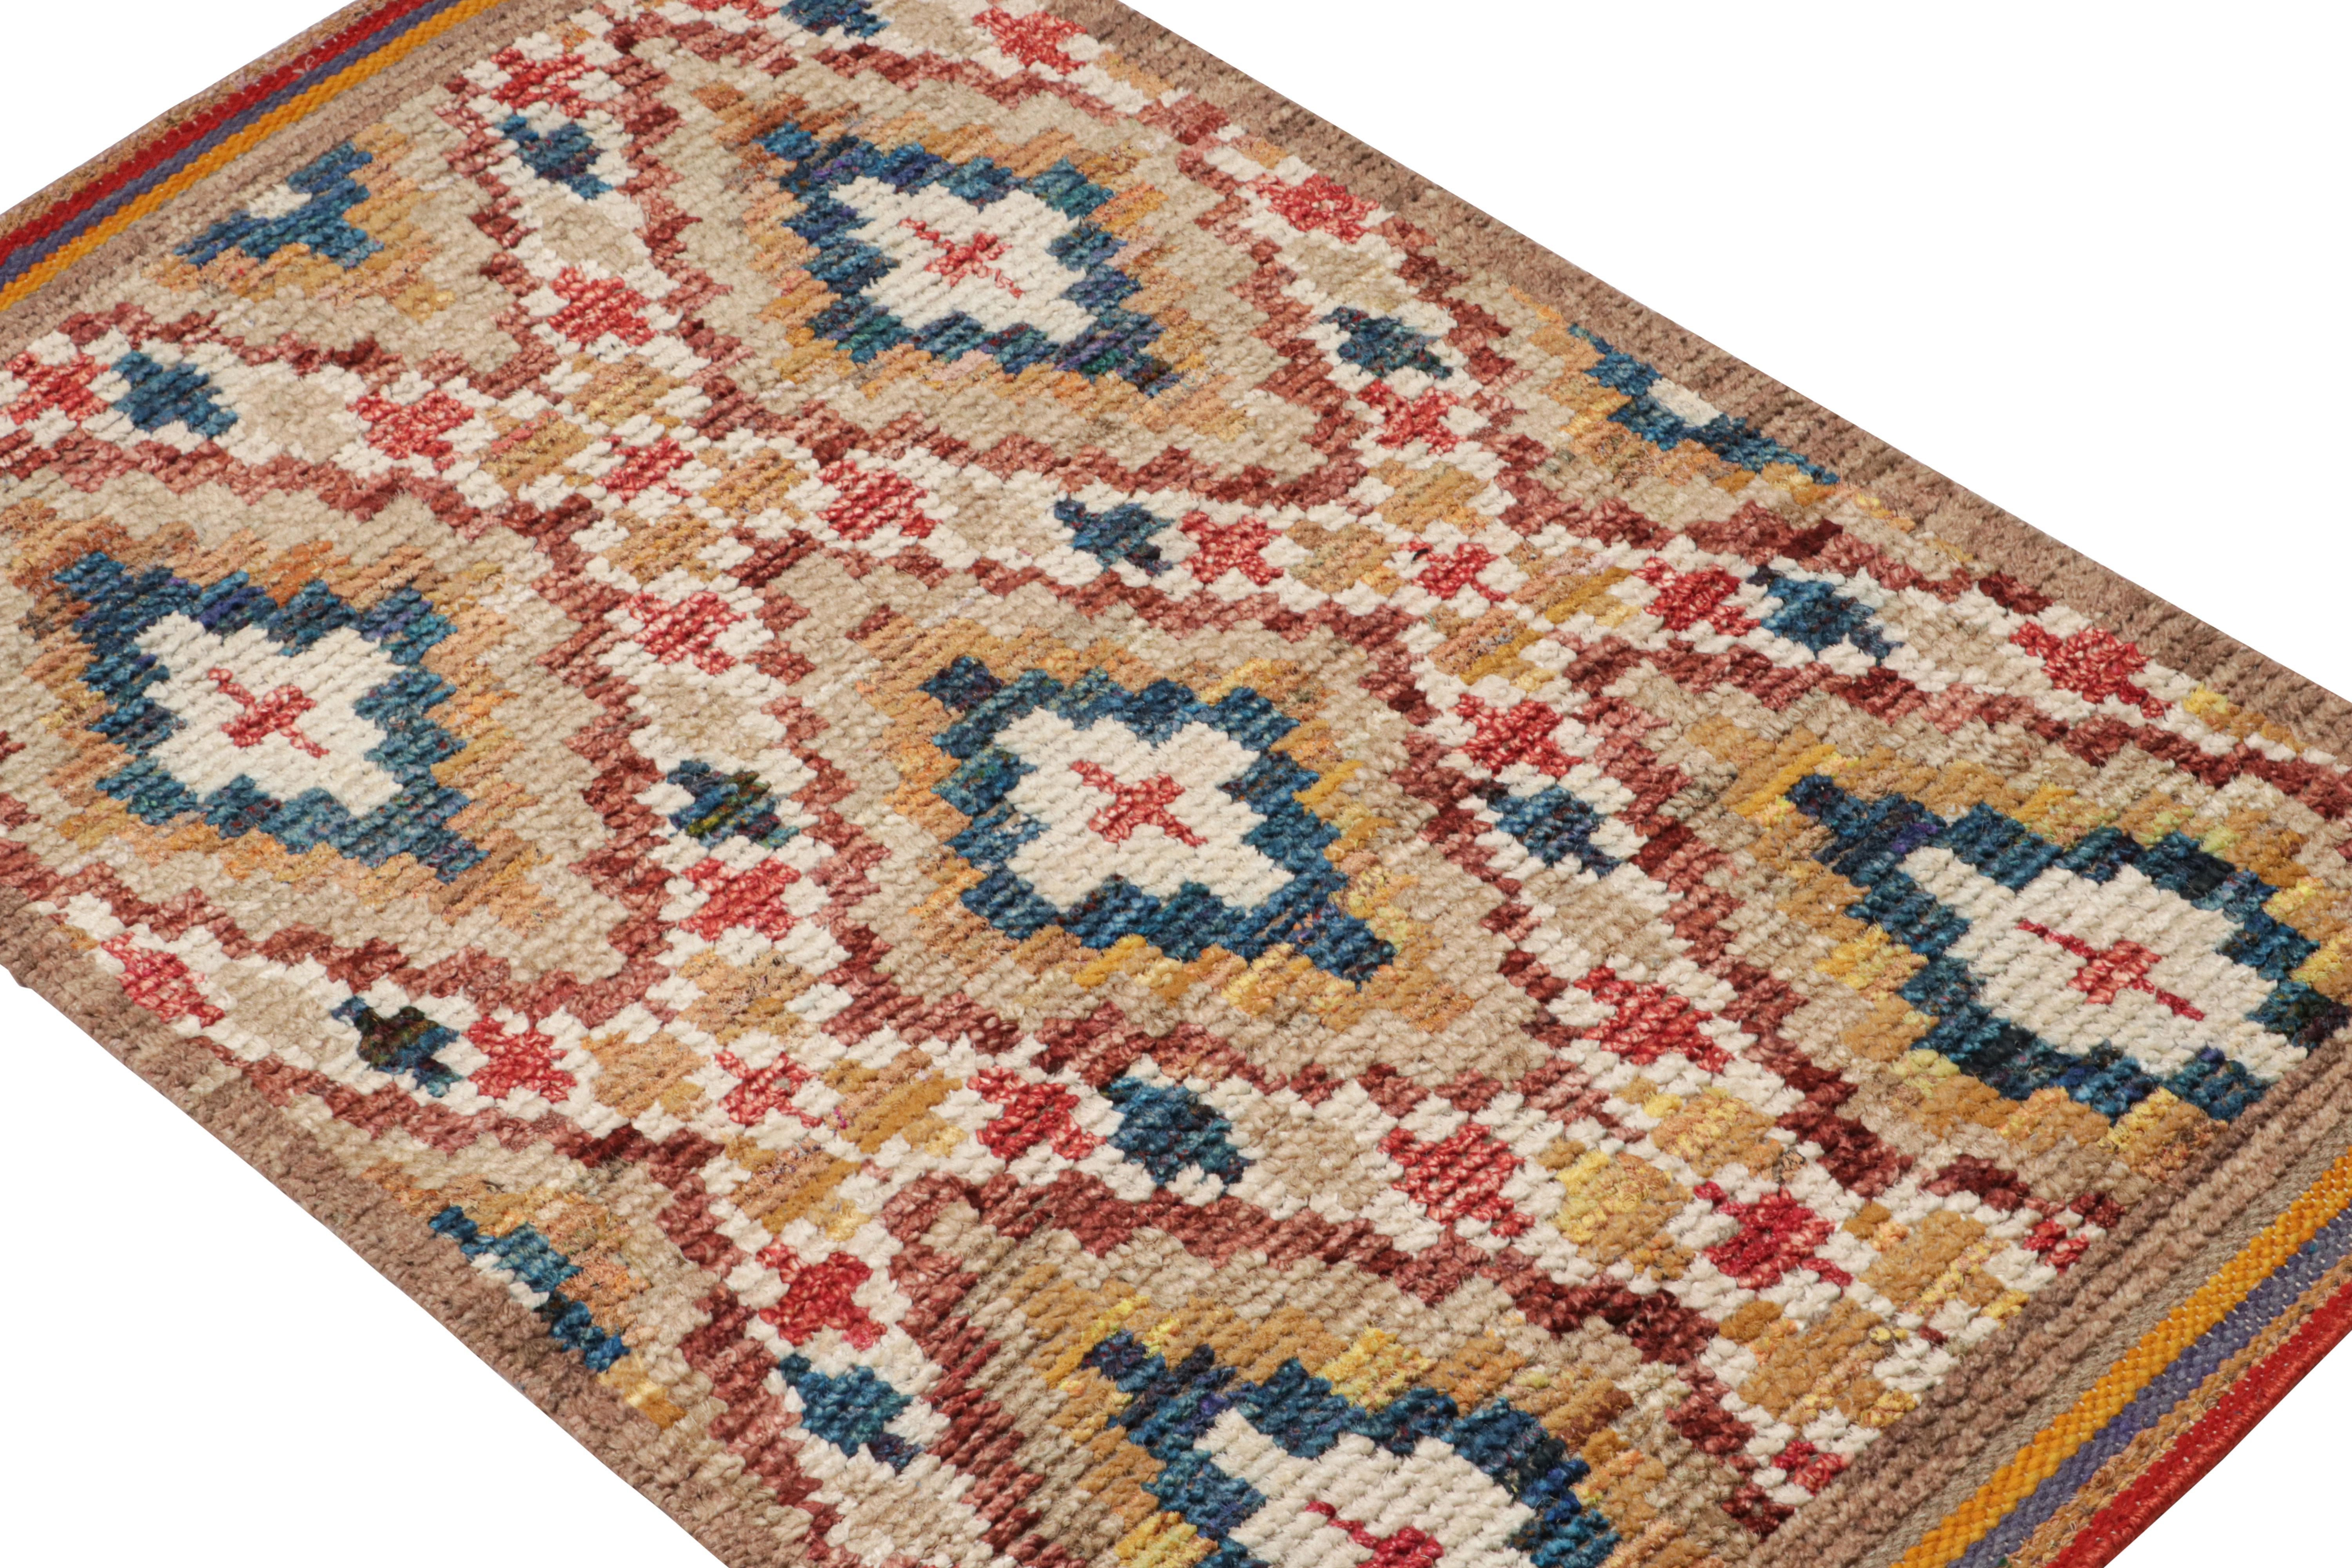 Modern Rug & Kilim’s Moroccan Style Rug with Diamond Geometric Patterns For Sale